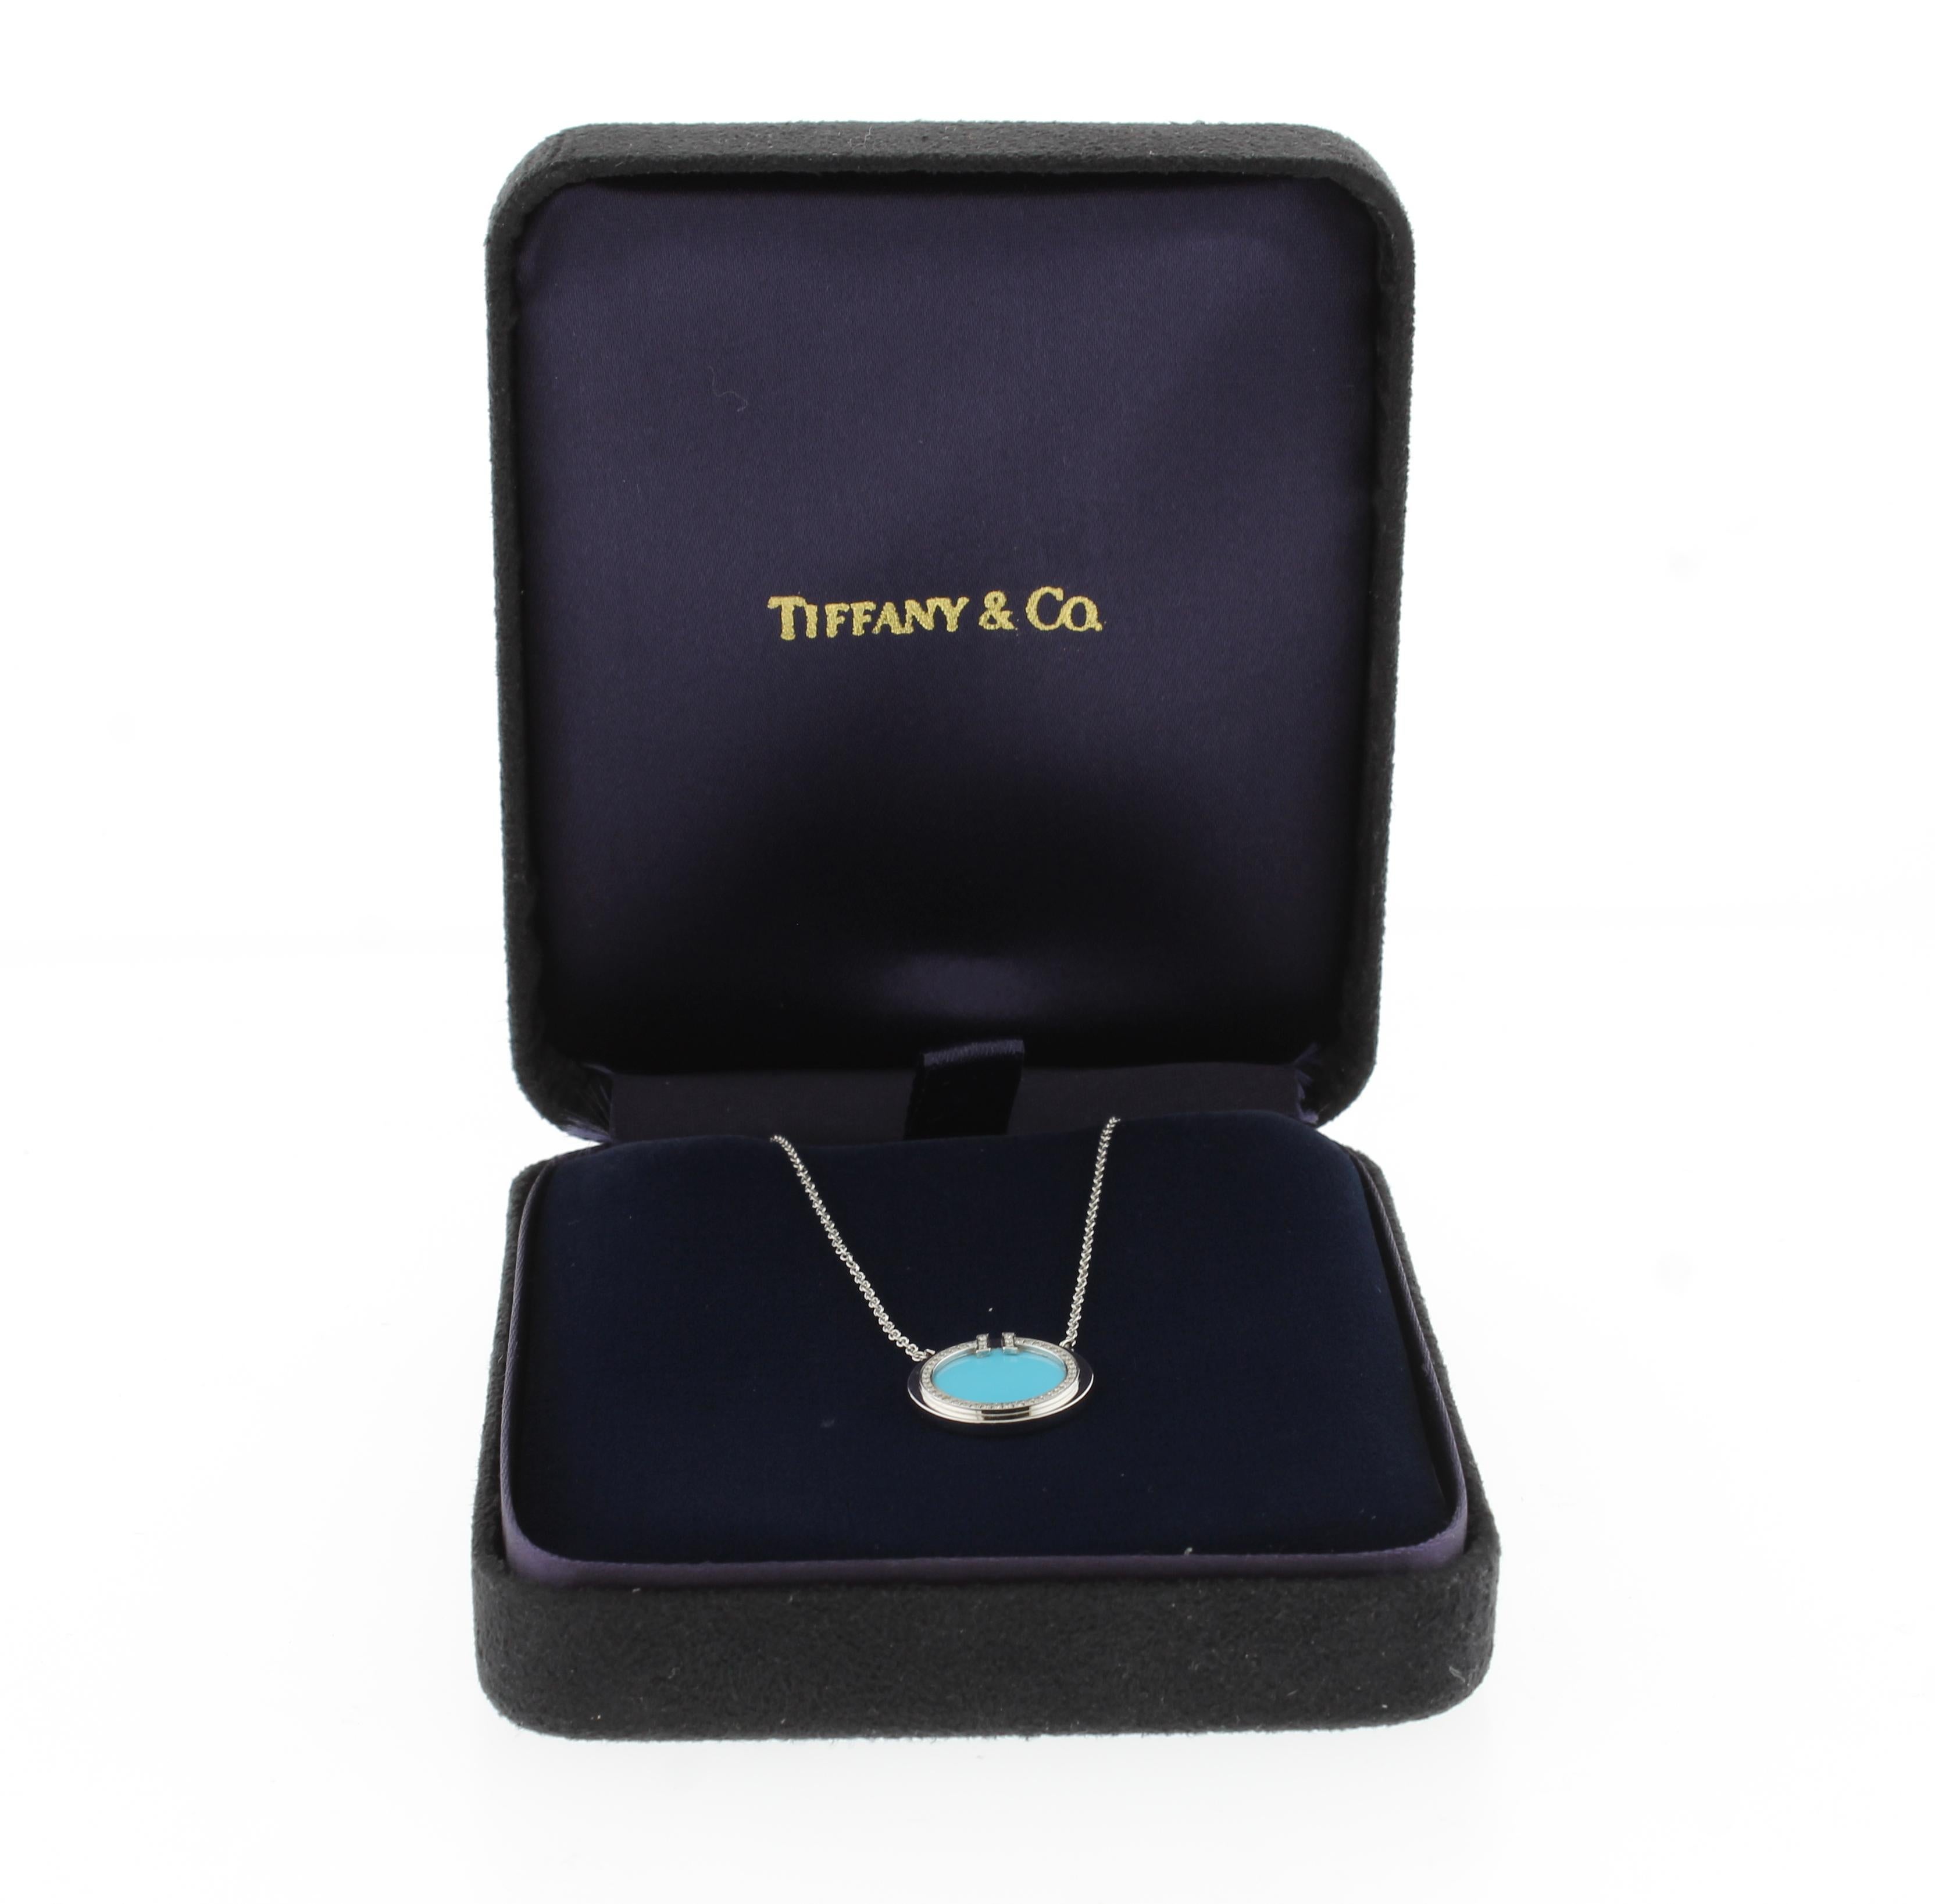  From Tiffany & Co, Diamond Turquoise Circle Pendant from the Tiffany T collection.
• Designer: Tiffany & Co.
• Metal: 18 karat white gold
• Circa: 2020s
• Diamond: 46 Diamonds =.05ct
• Packaging:  Tiffany Box
• Condition: Excellent
